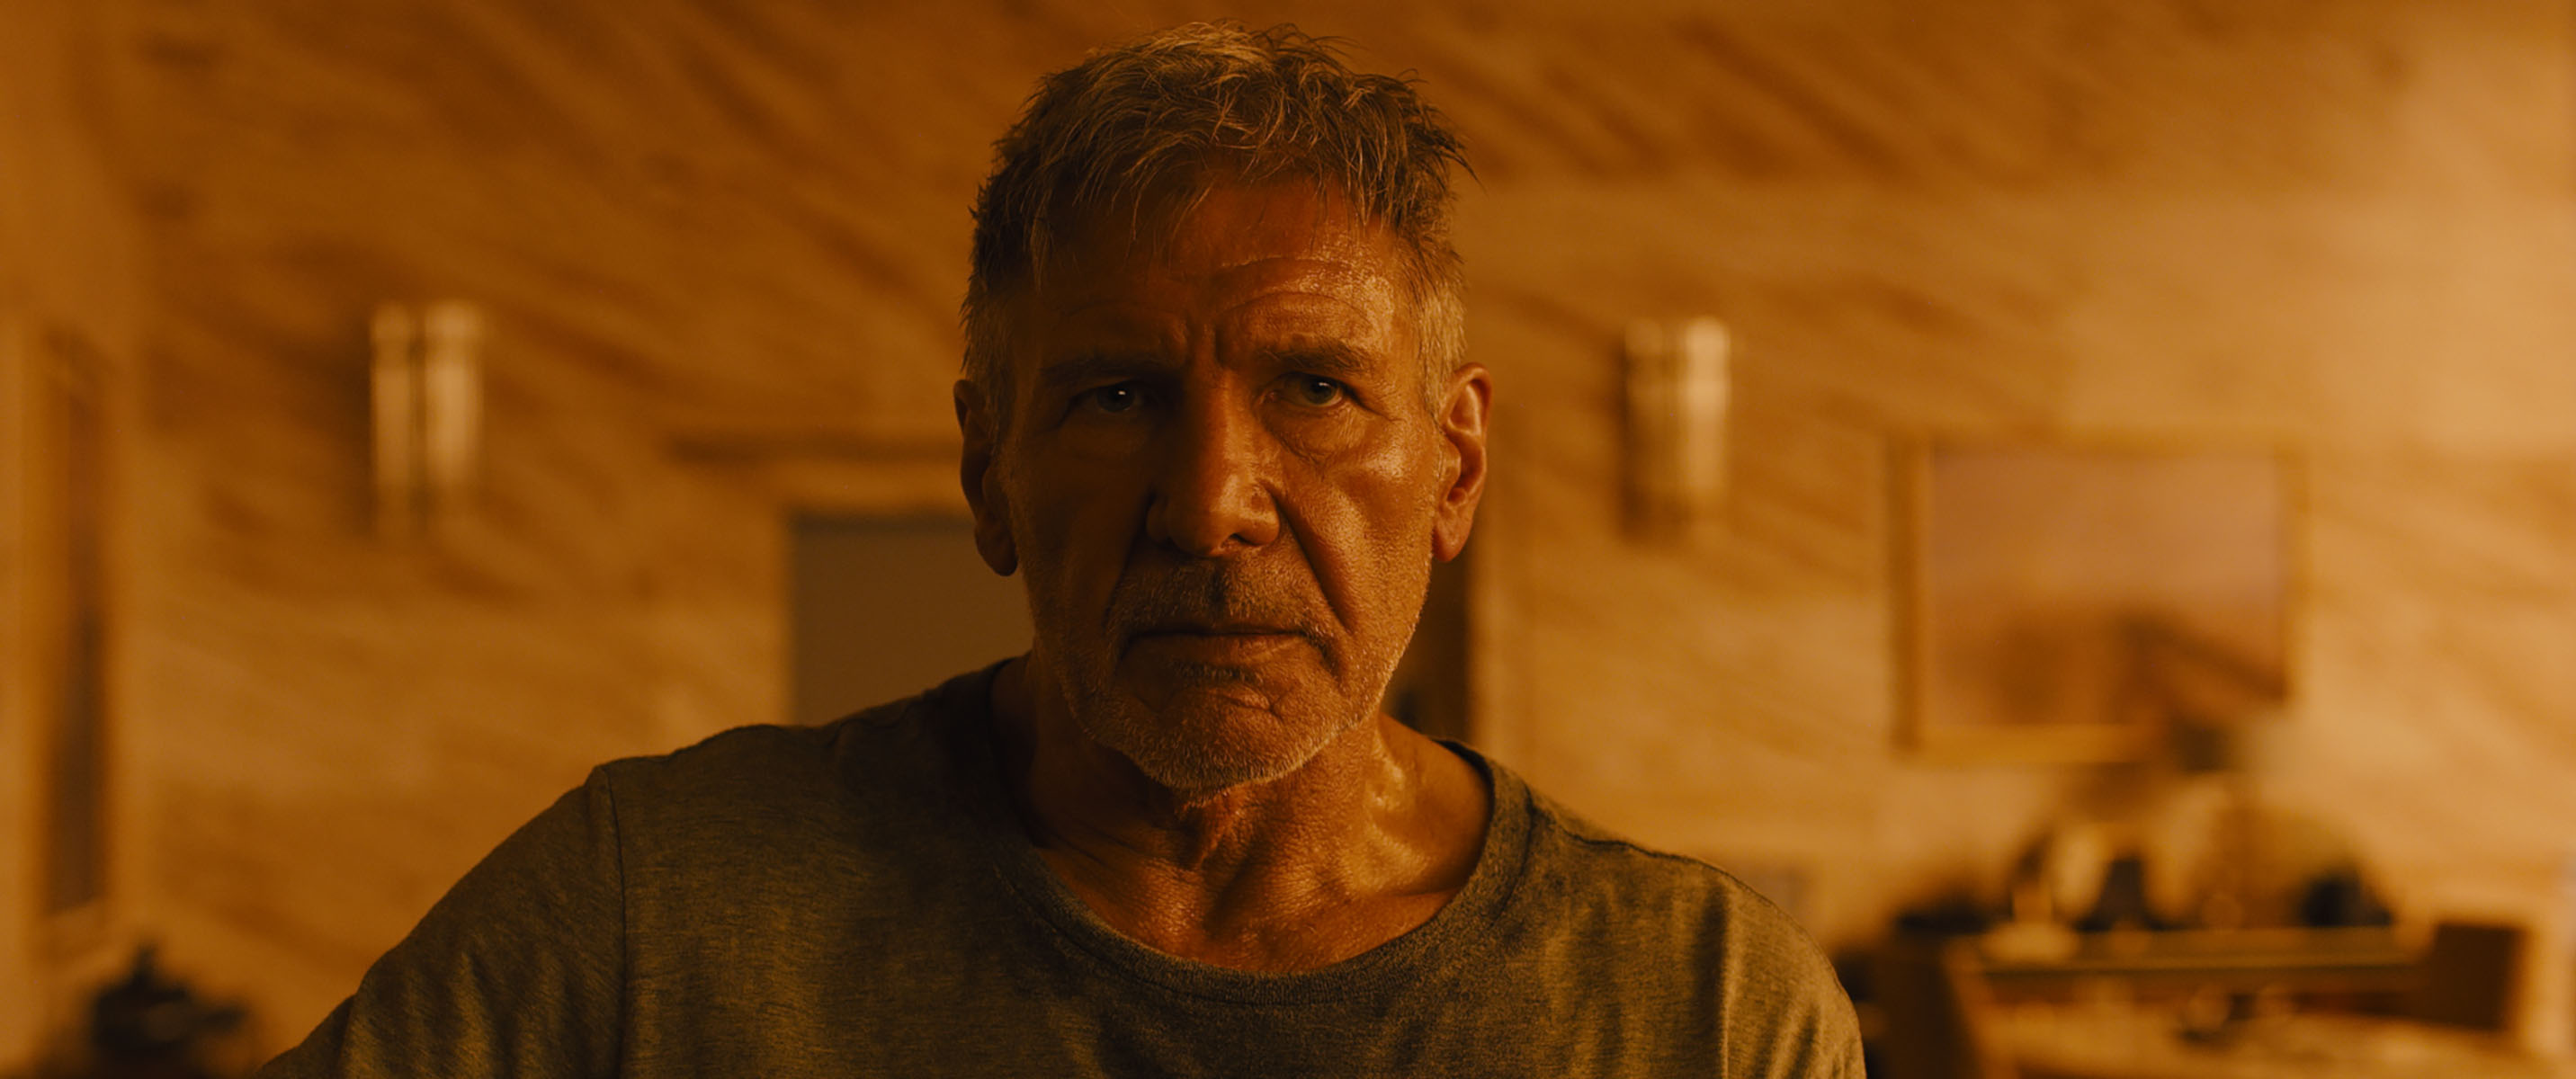 Harrison Ford: Played Rick Deckard in the dystopian science fiction film Blade Runner 2049 (2017). 2870x1200 Dual Screen Background.